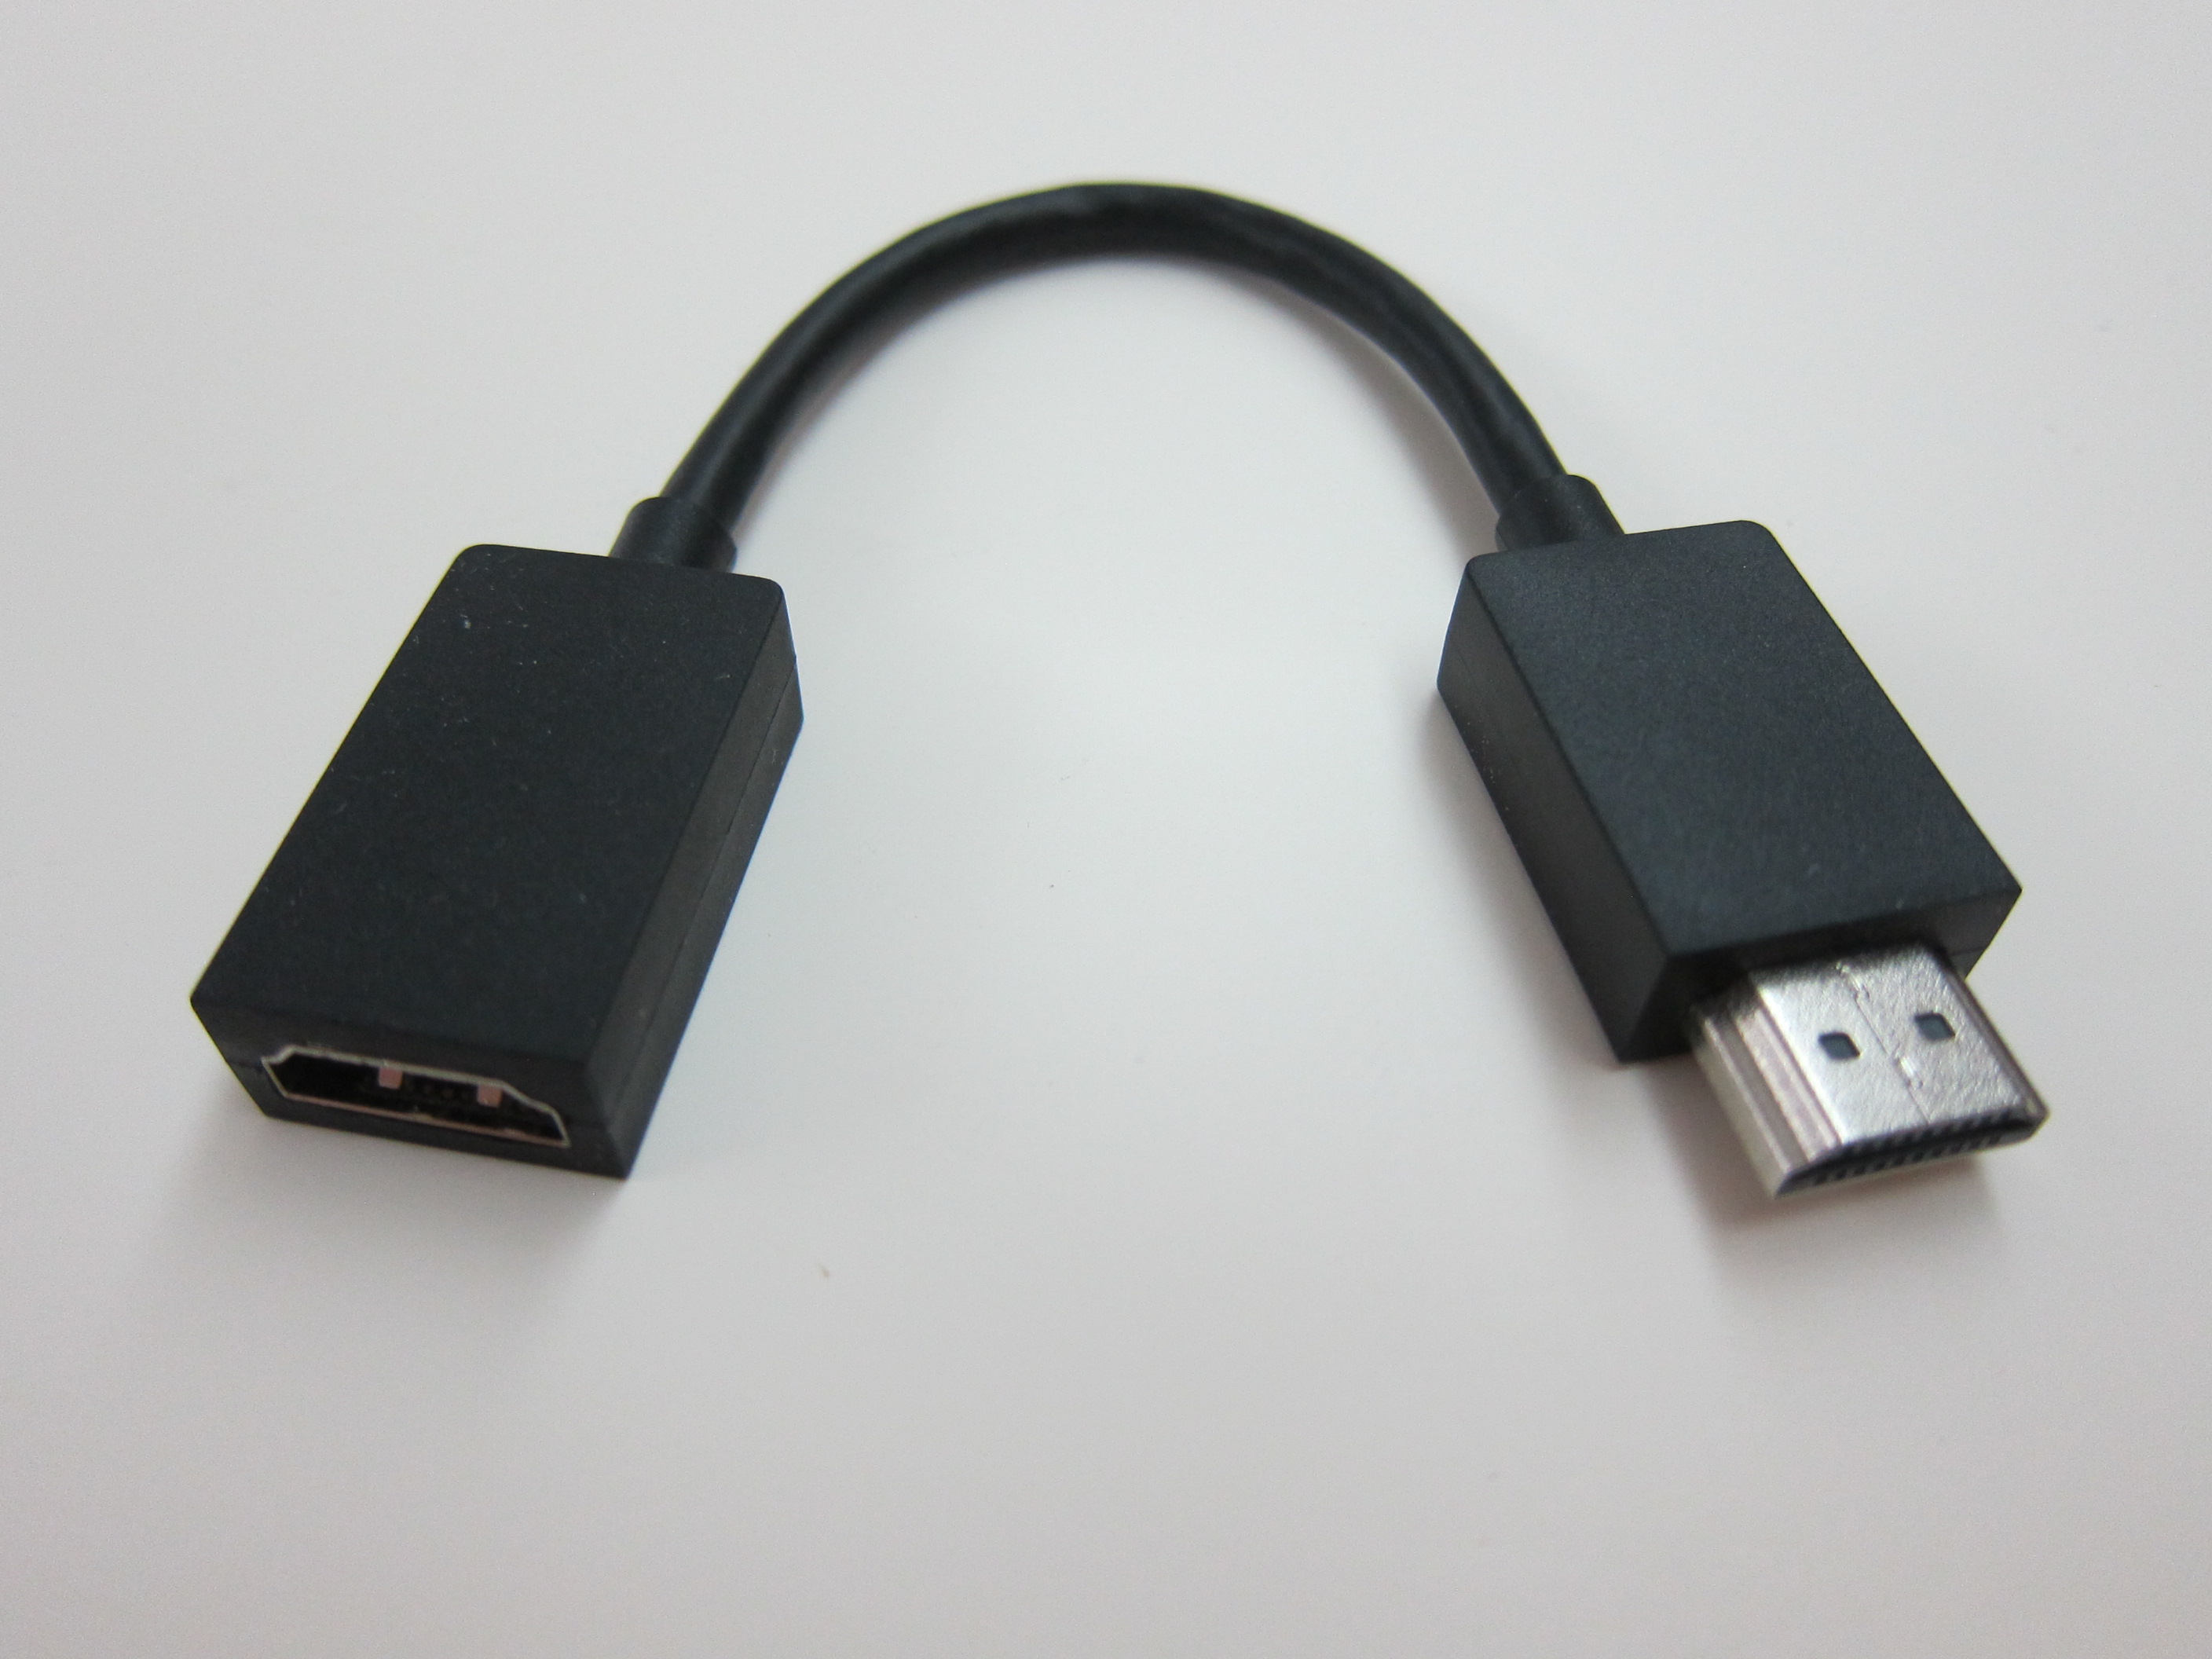 Microsoft Wireless Display Adapter Review « Blog